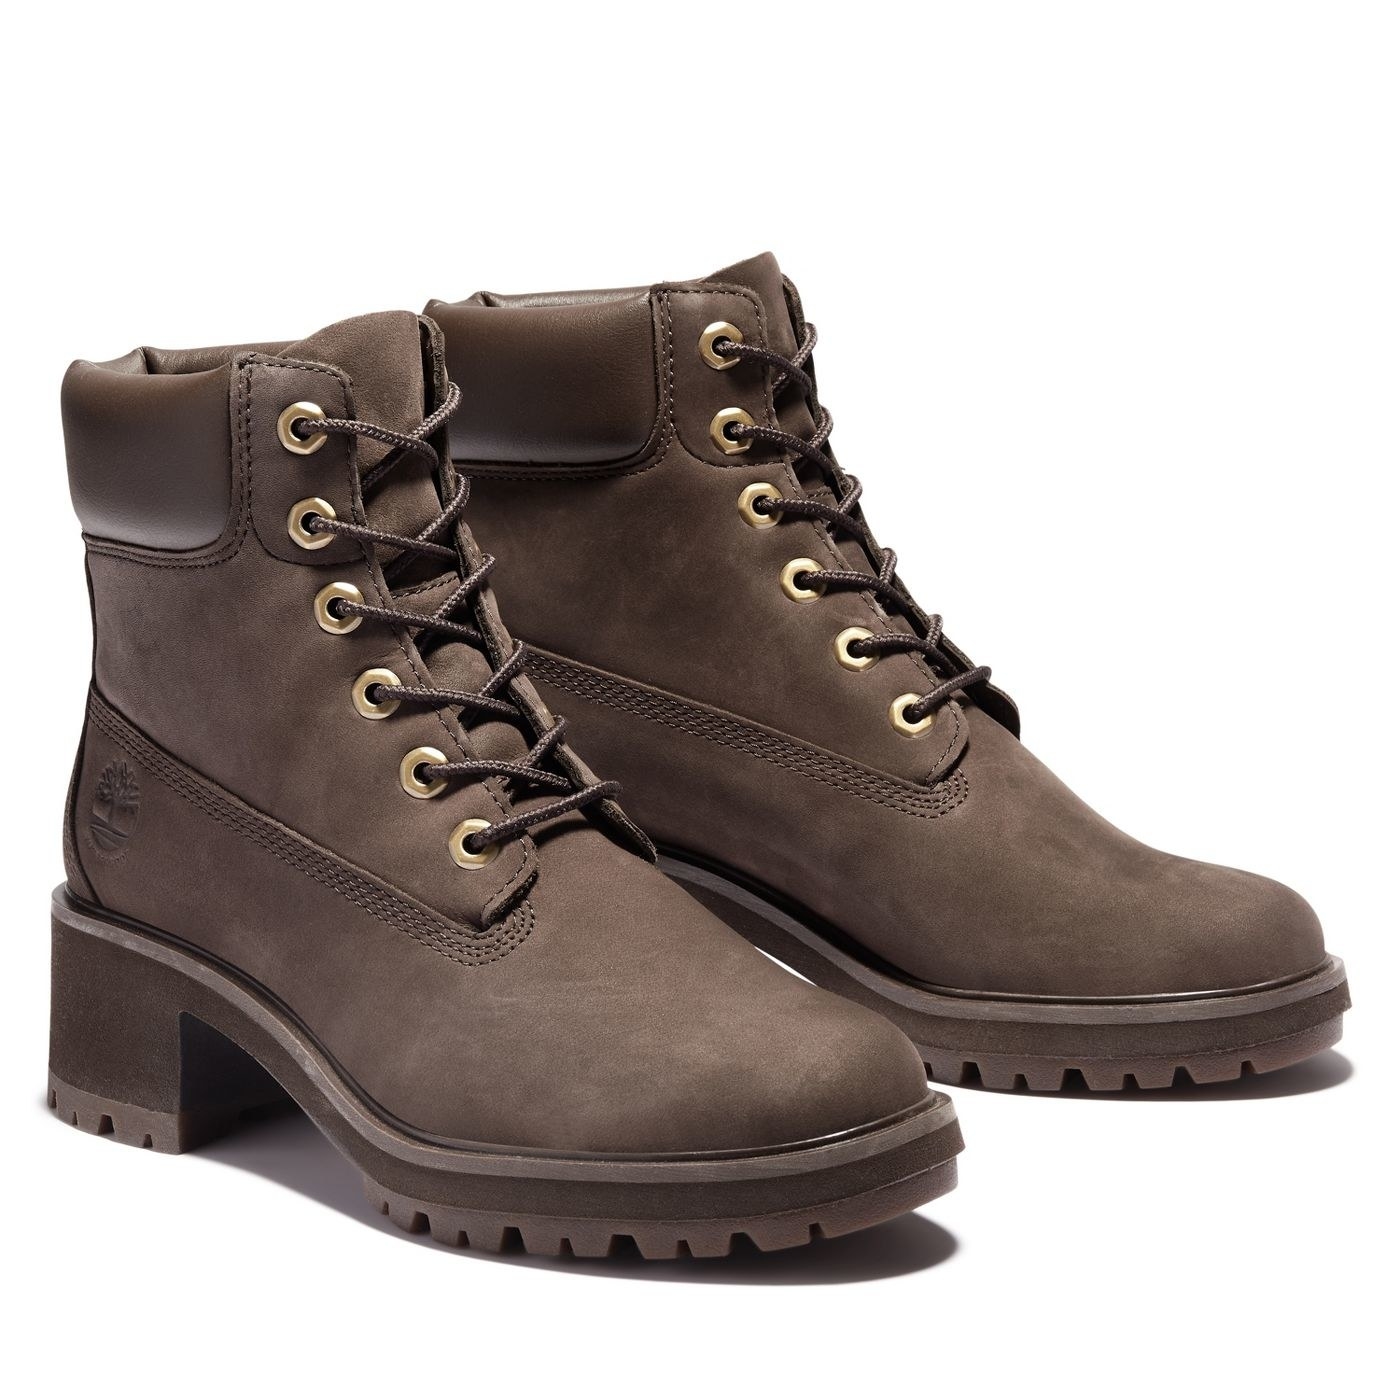 the heeled lace-up boot in dark brown